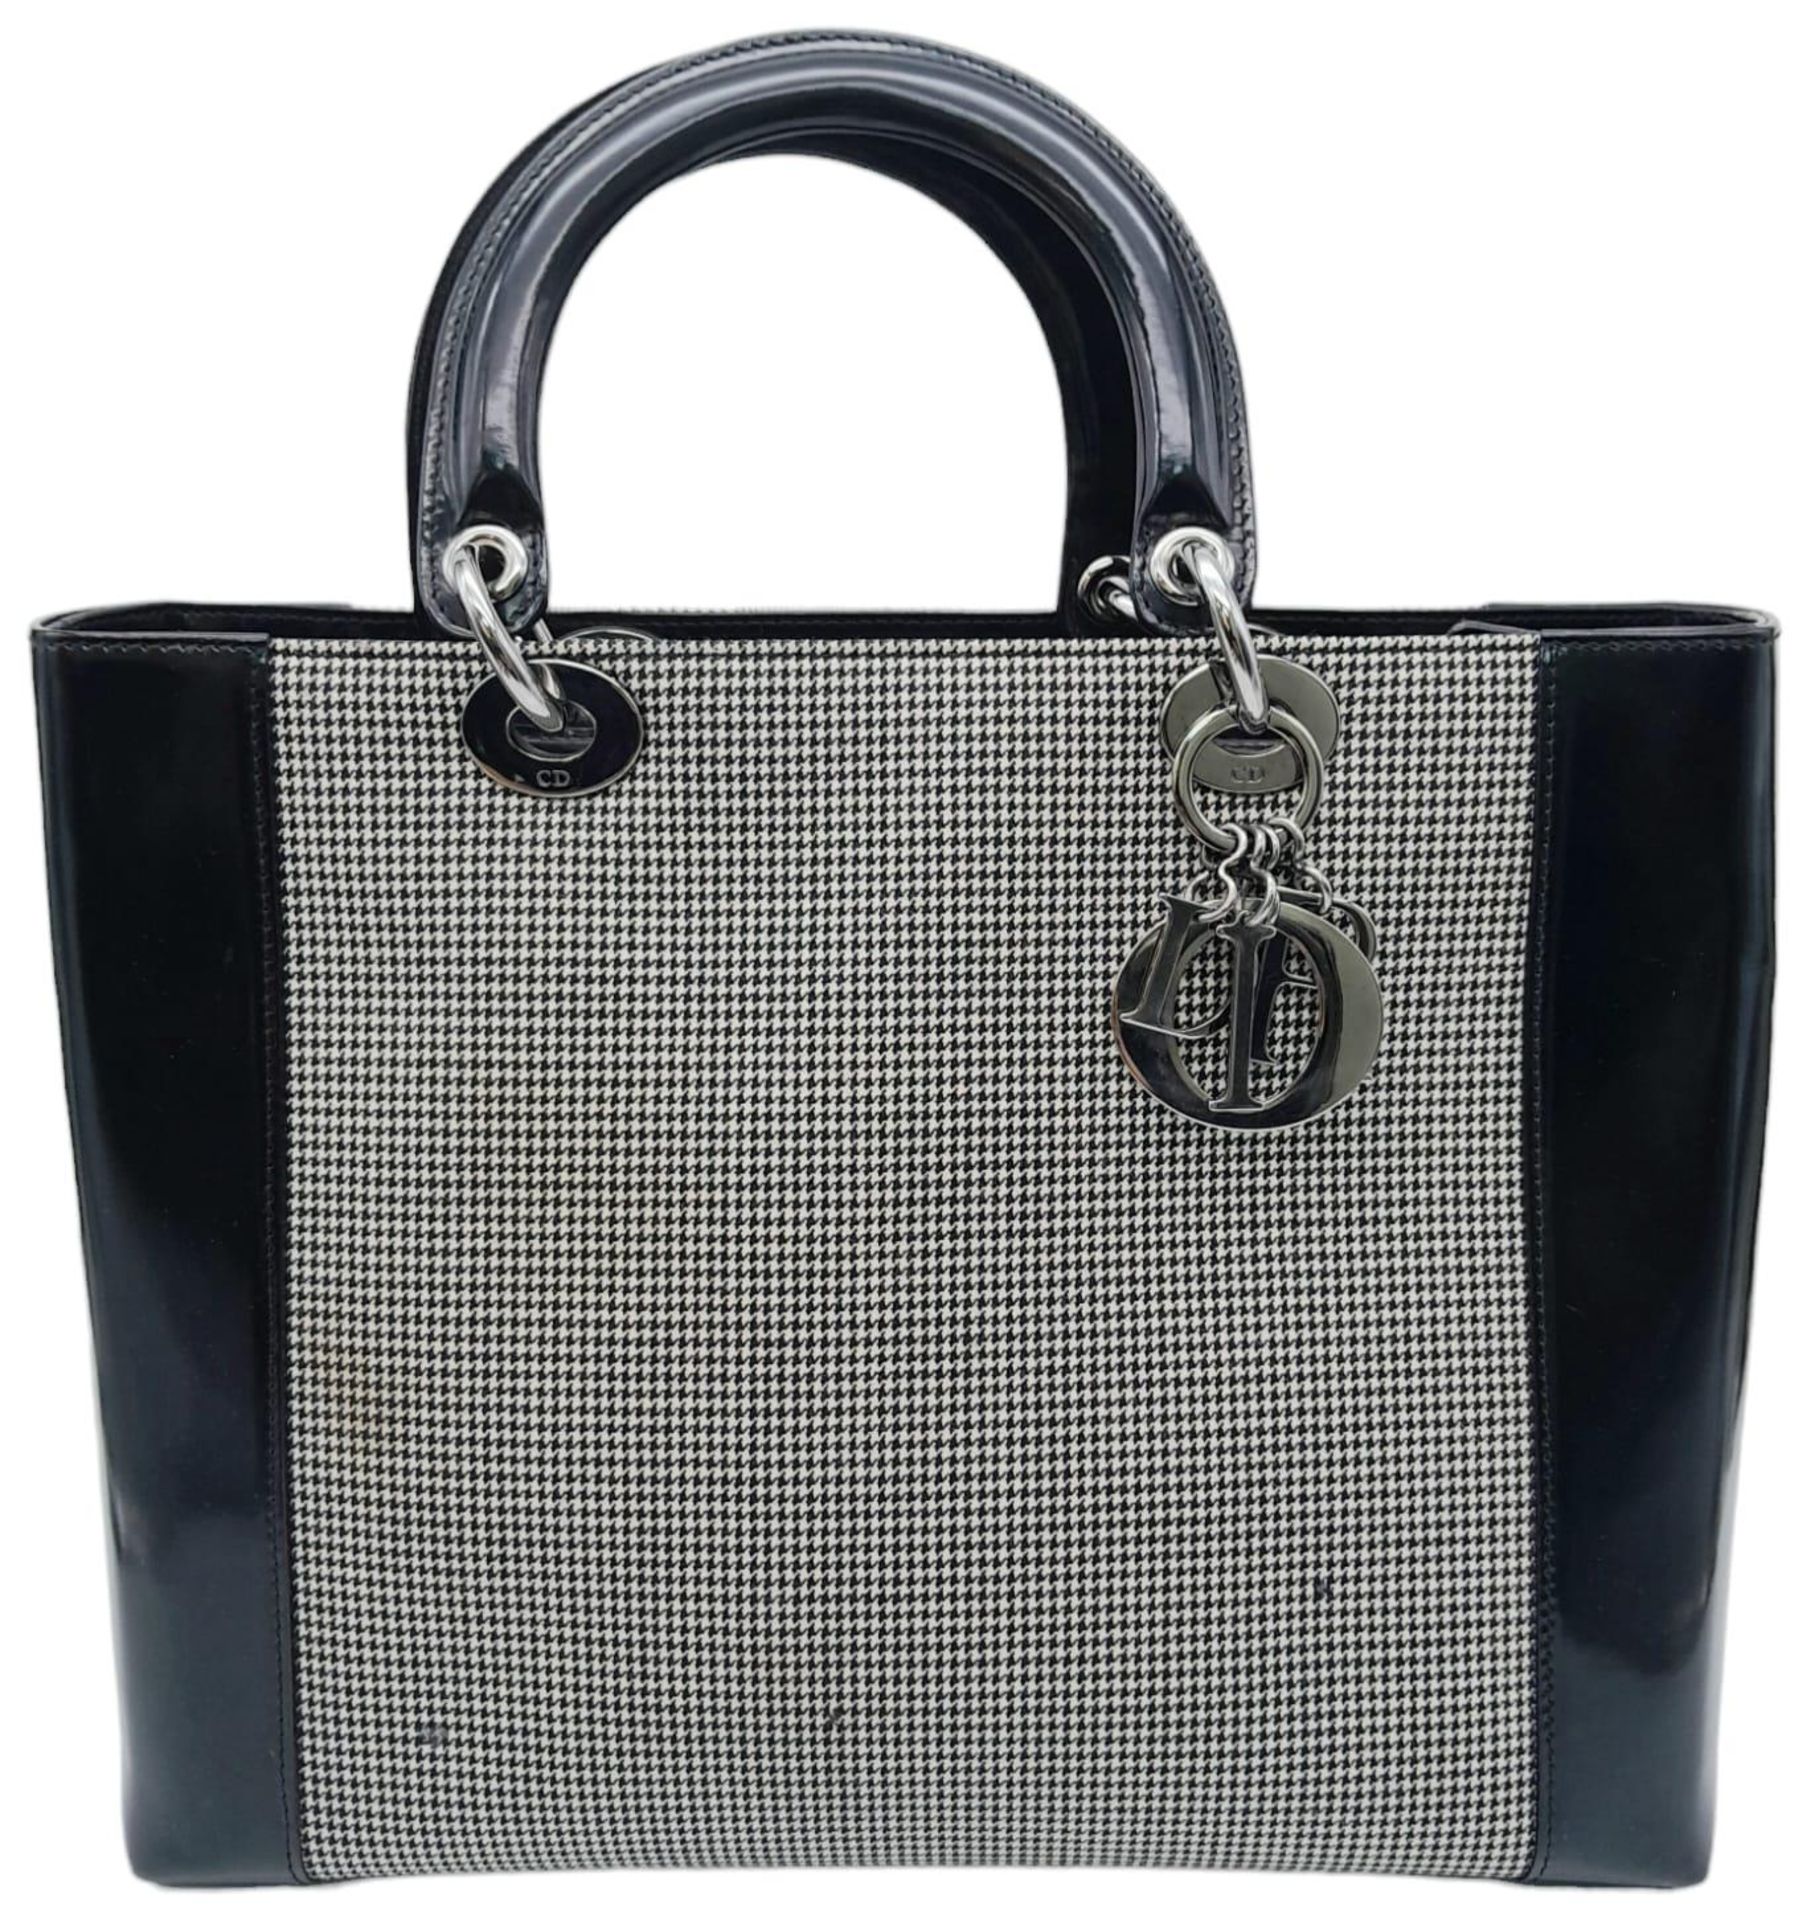 A Christian Dior - Lady Dior Bag. Canvas and black patent leather exterior. Silver tone hardware. - Image 2 of 9